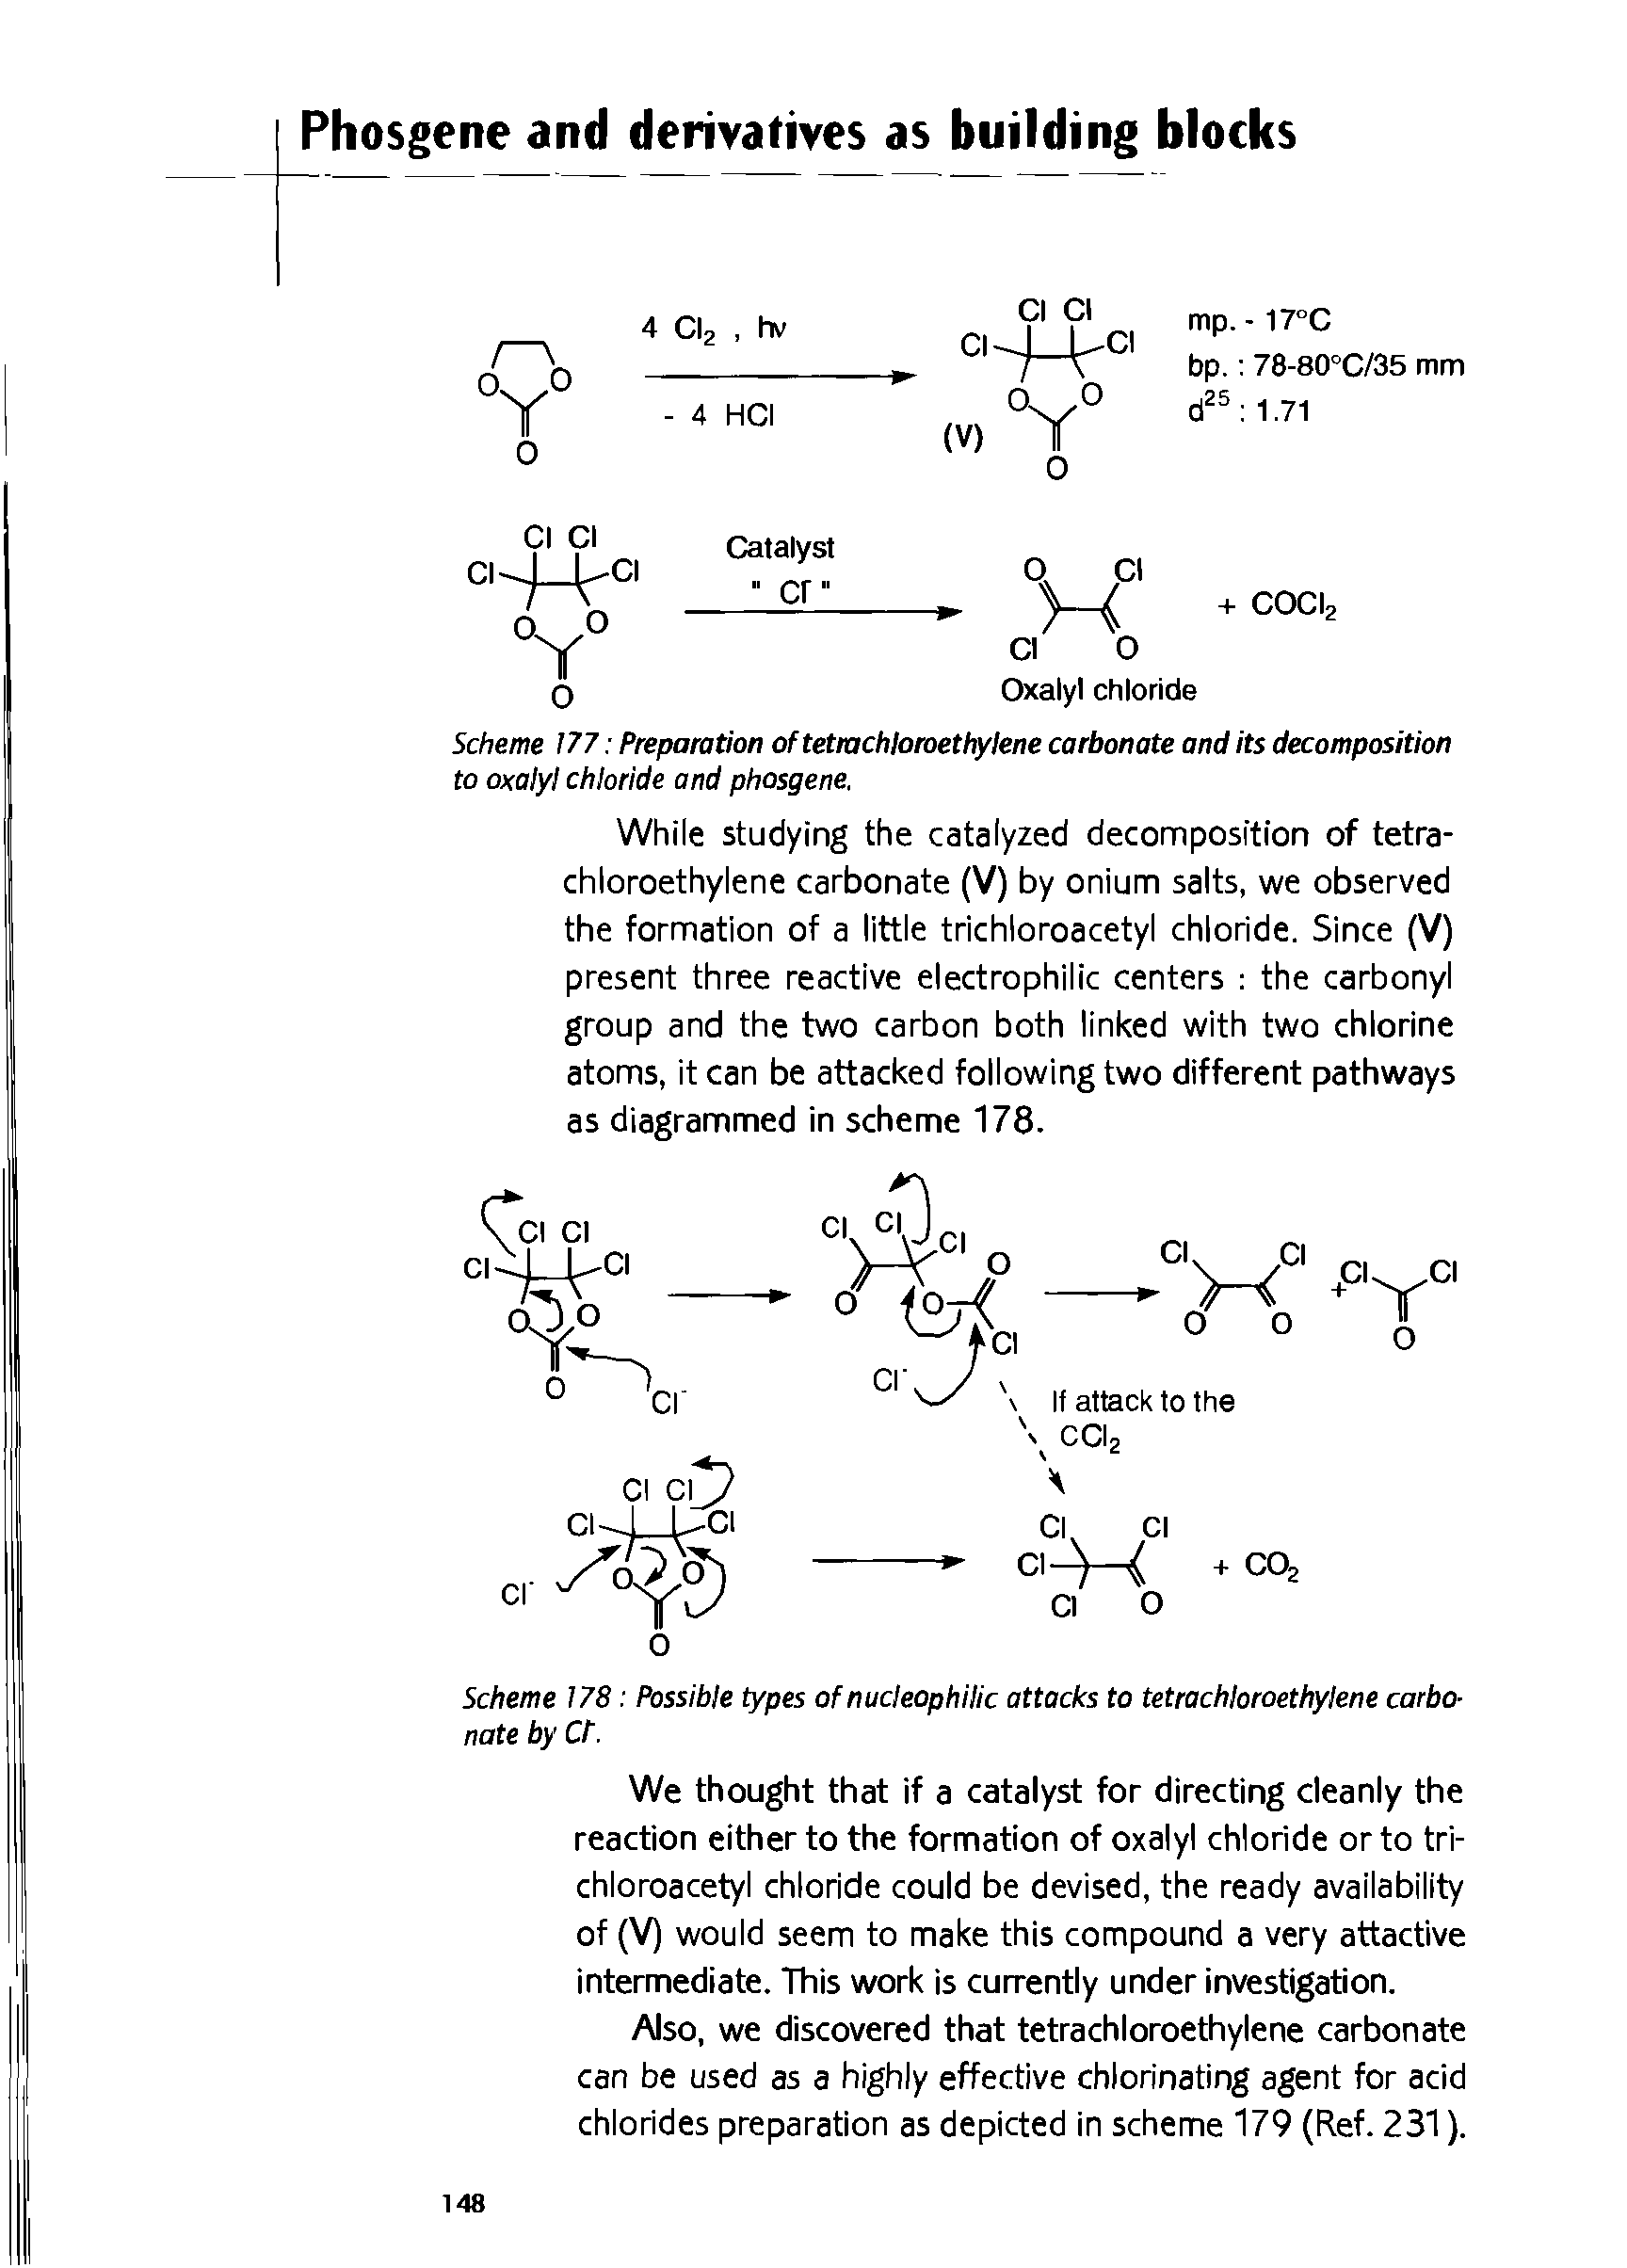 Scheme 178 Possible types of nucleophilic attacks to tetrachloroethylene carbonate by Ct.